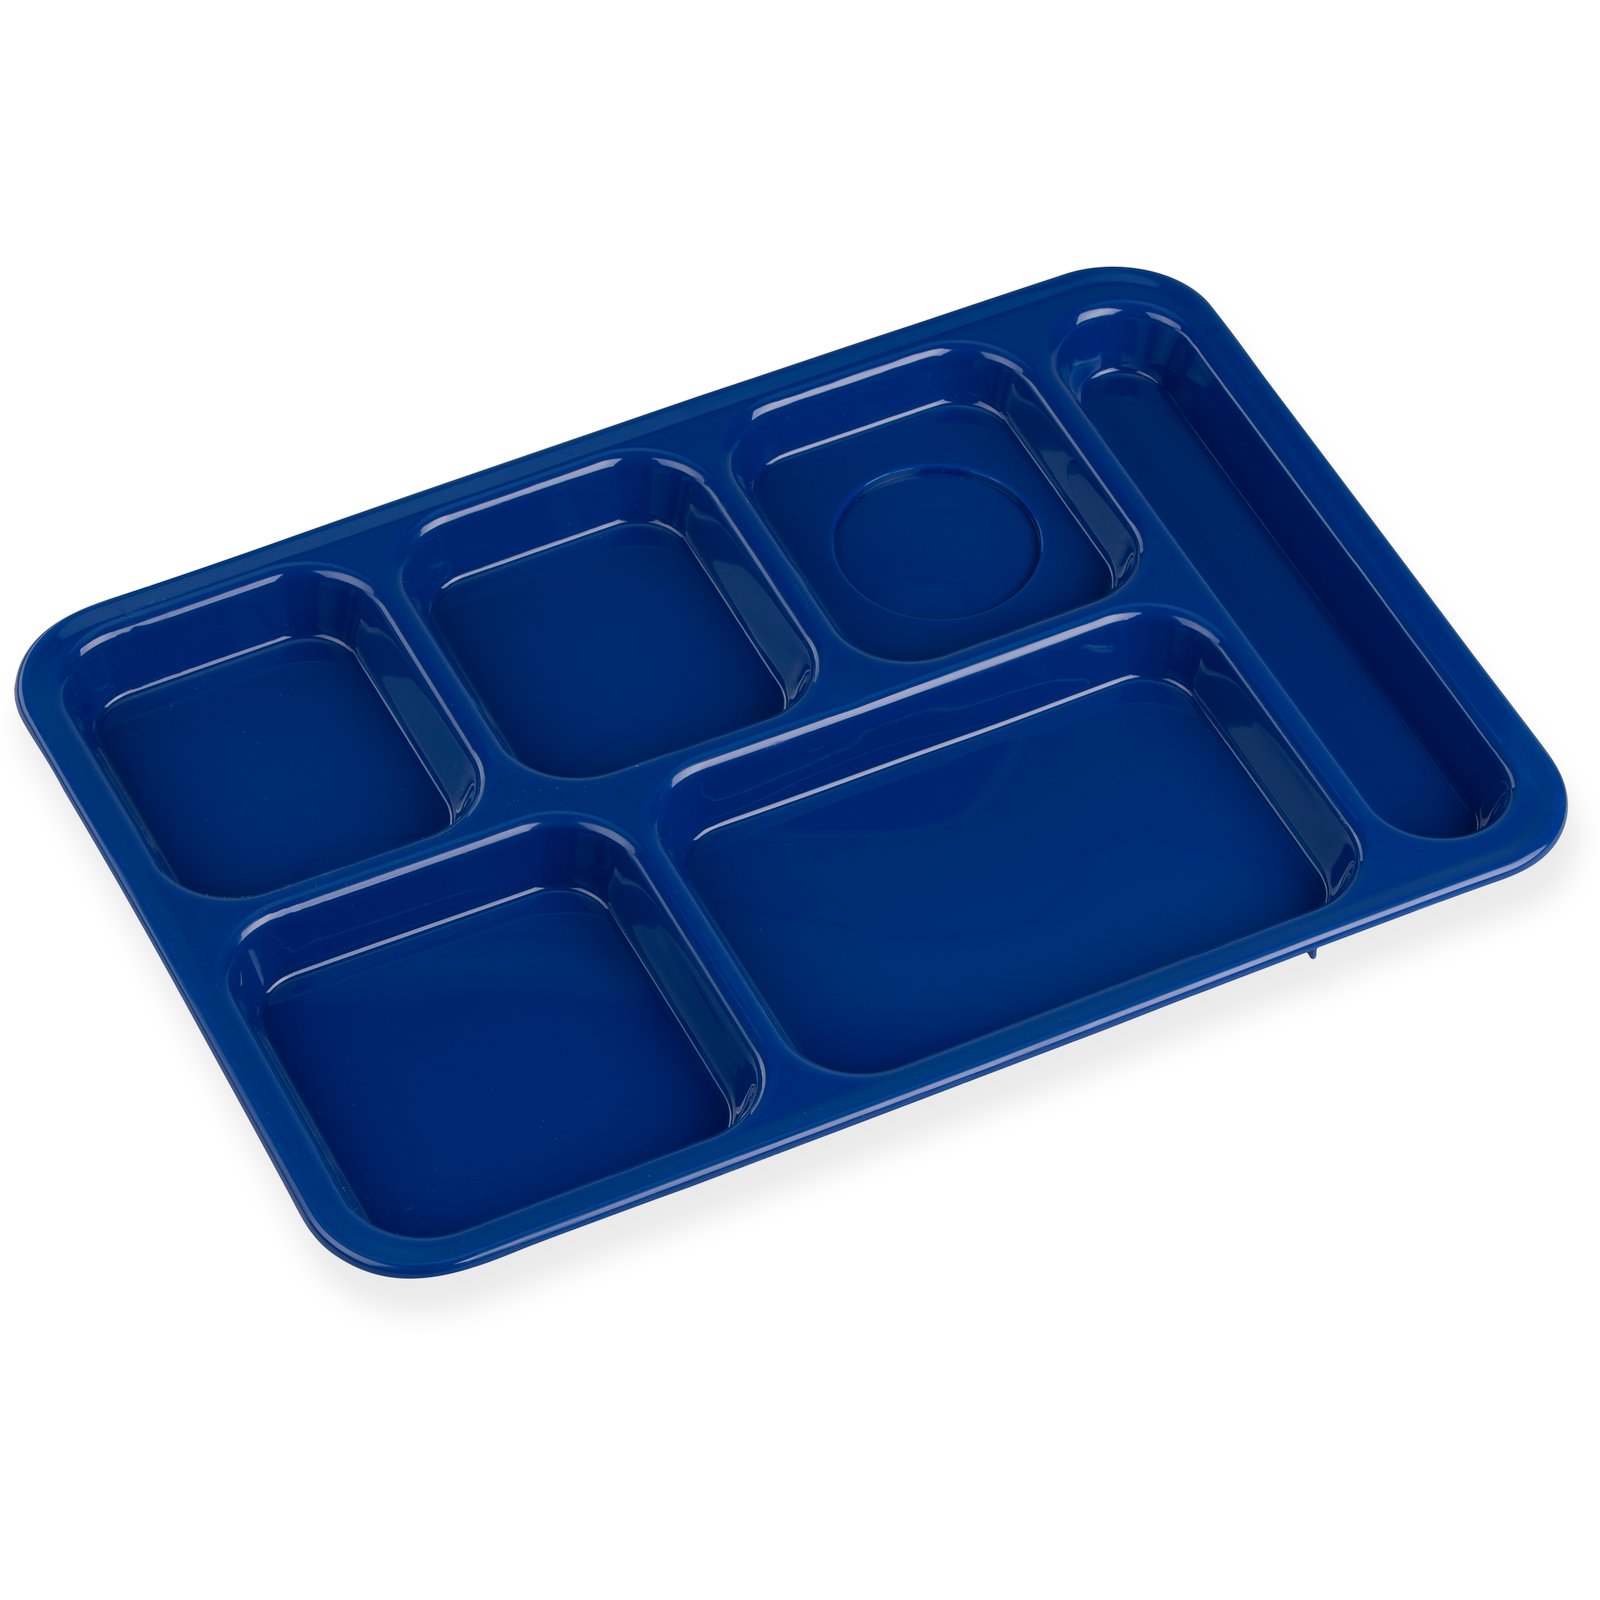 Yellow, 6-Compartment Polypropylene Lunch Tray, 24/PK